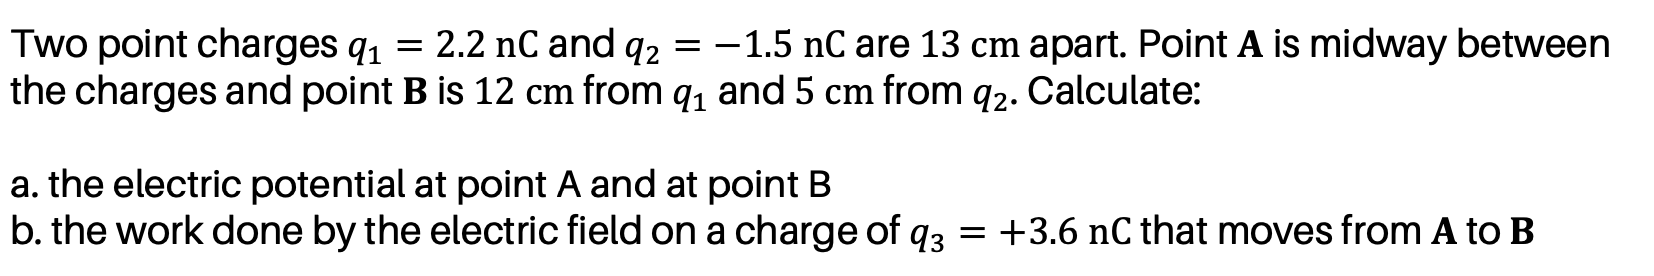 Two point charges q1 = 2.2 nC and q2 = -1.5 nC are 13 cm apart. Point A is midway between
the charges and point B is 12 cm from q, and 5 cm from q2. Calculate:
a. the electric potential at point A and at point B
b. the work done by the electric field on a charge of q3 = +3.6 nC that moves from A to B
